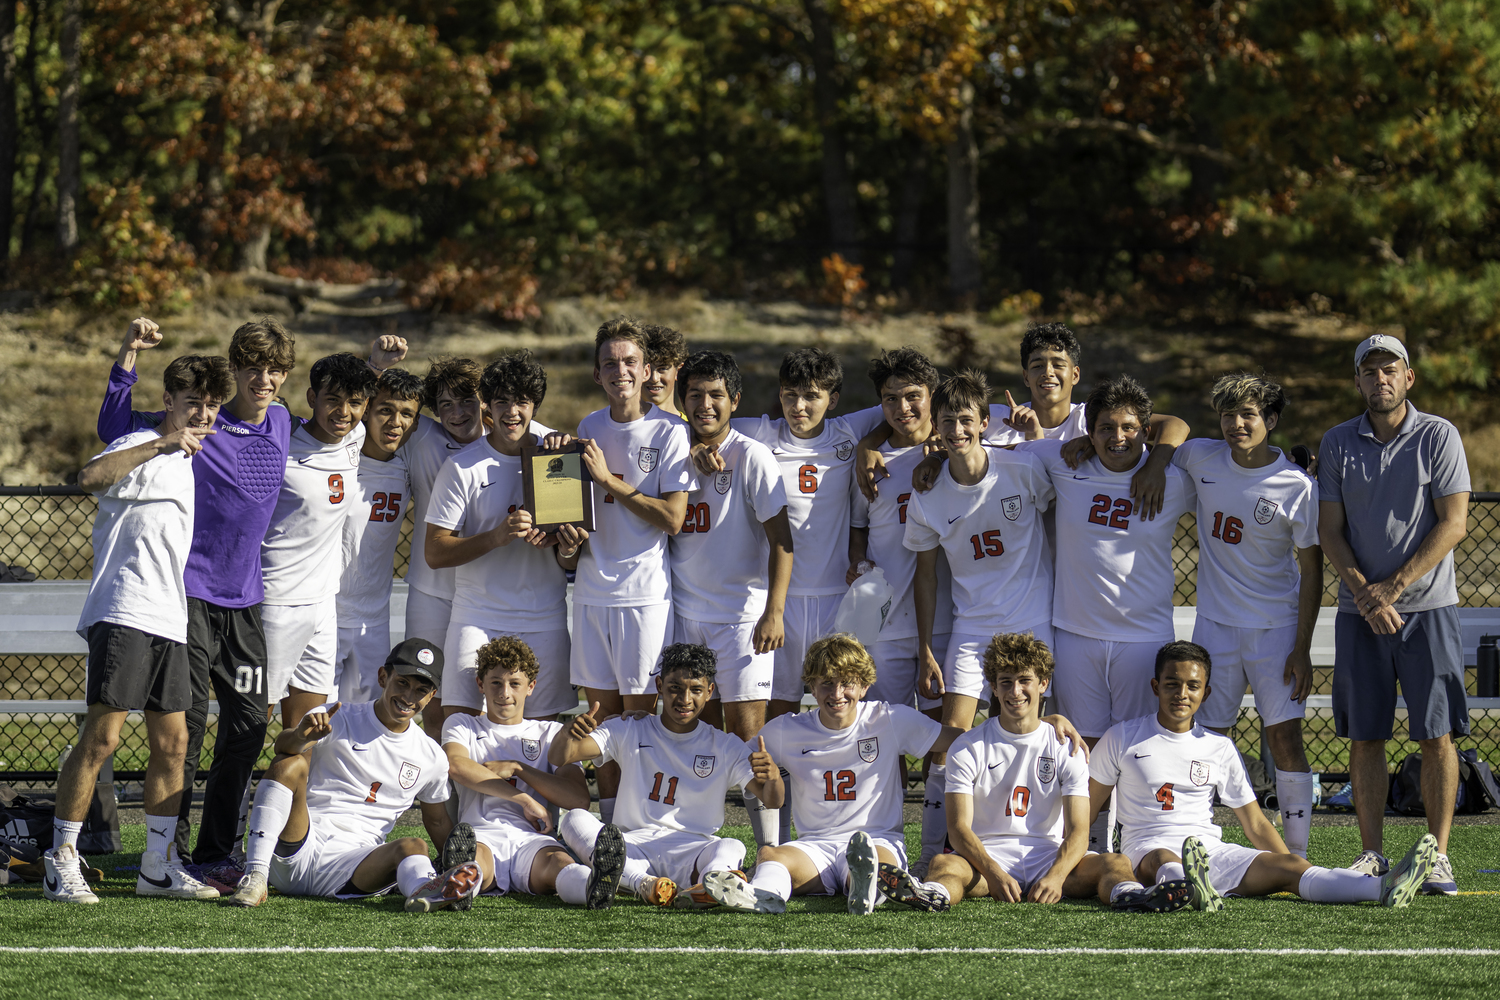 The Pierson/Bridgehampton boys soccer team retained the Suffolk County Class C Championship after defeating Greenport, 5-4, in penalty kicks on Saturday afternoon.    MARIANNE BARNETT